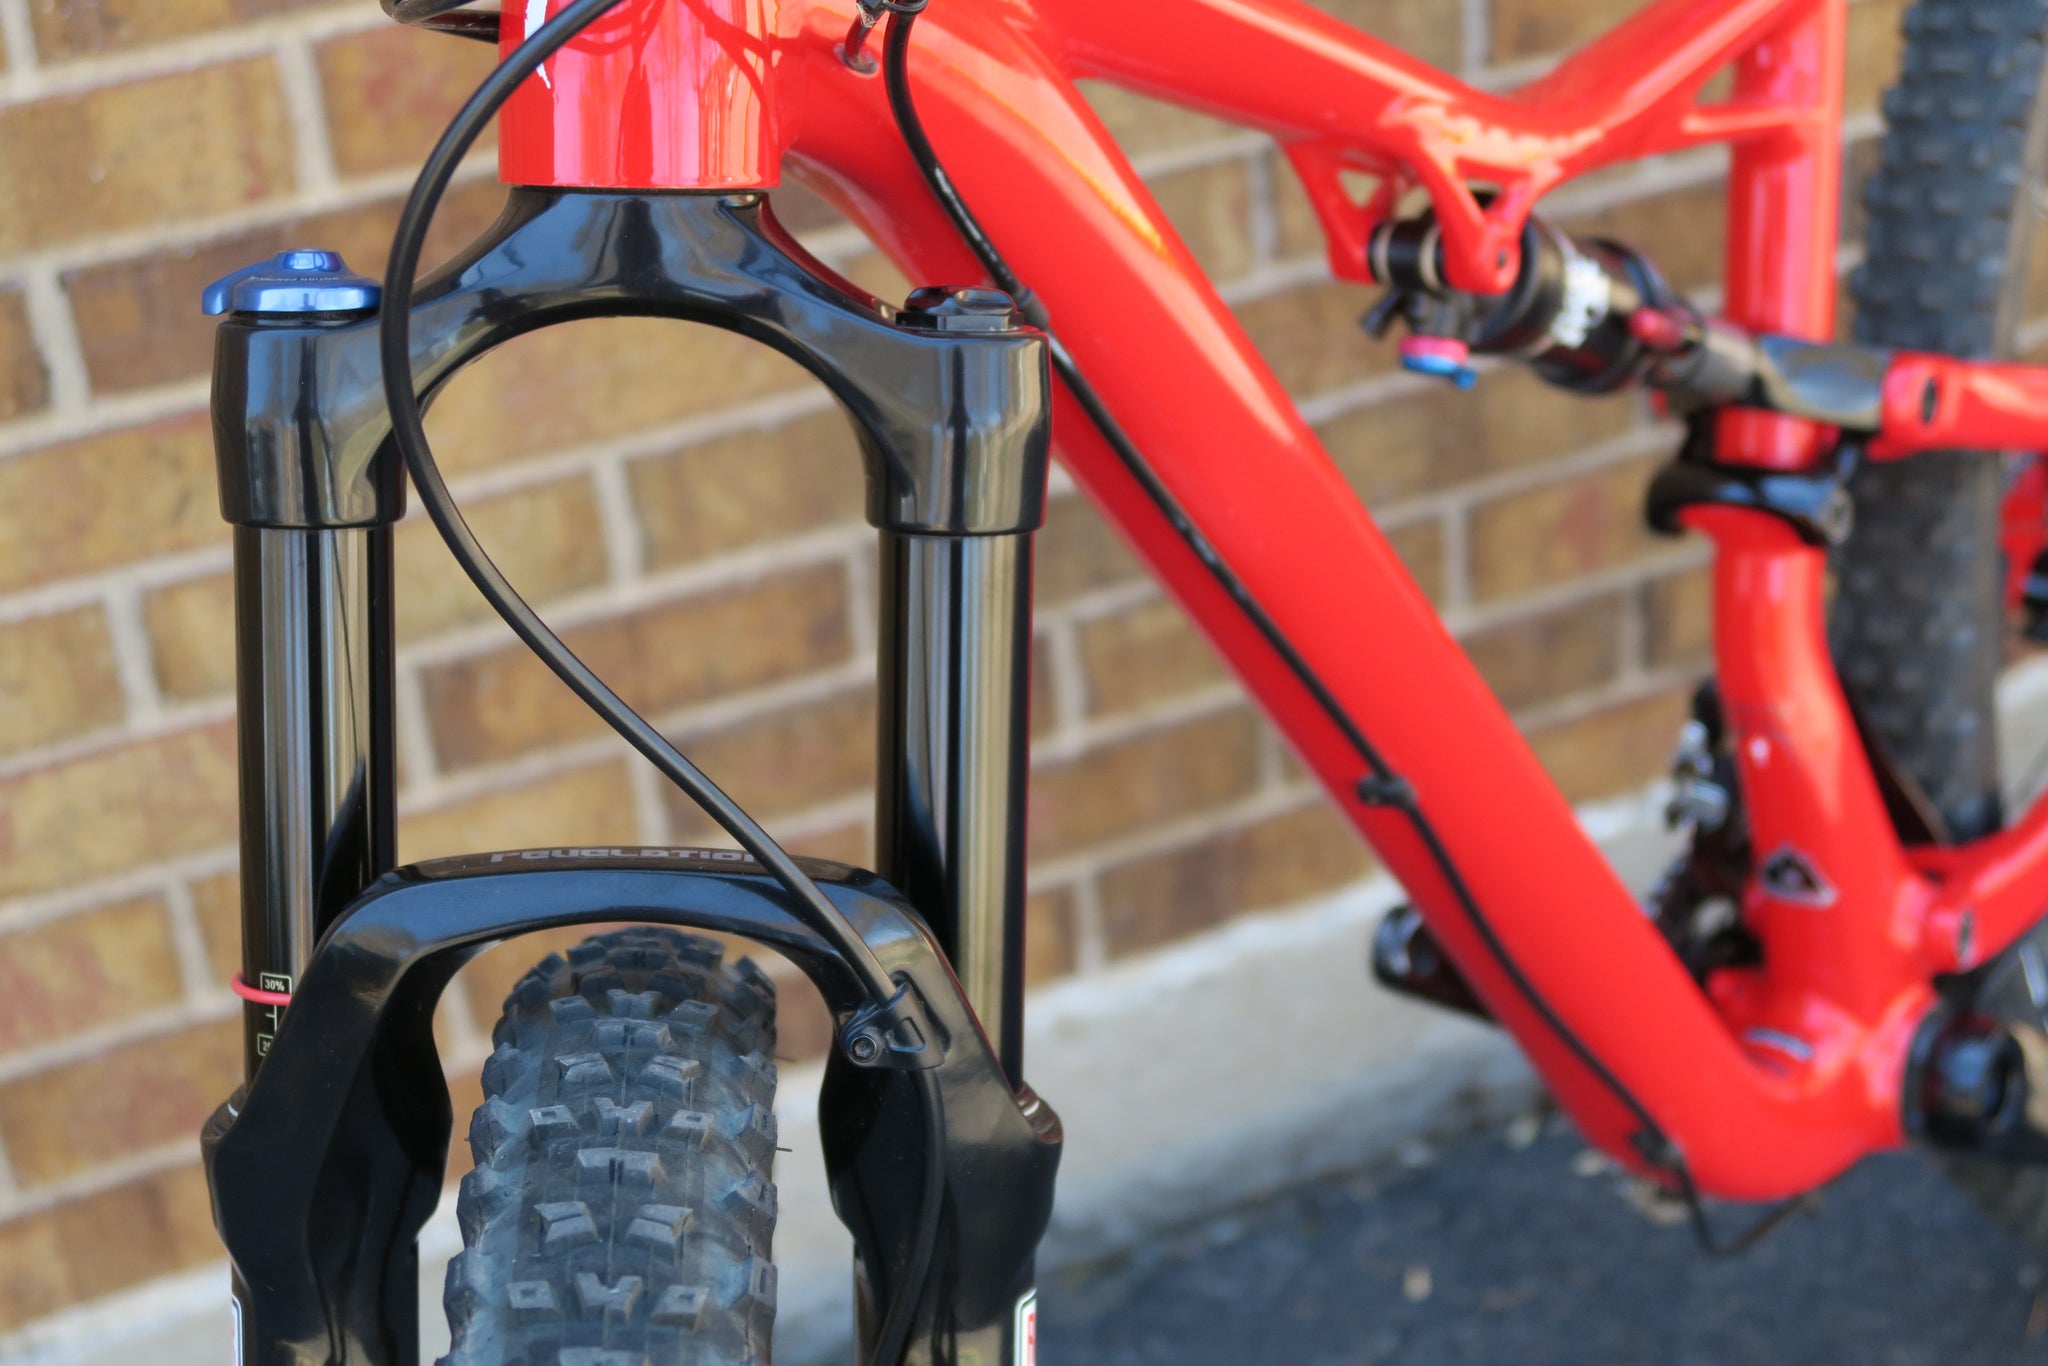 2016 SPECIALIZED CAMBER COMP 29" M